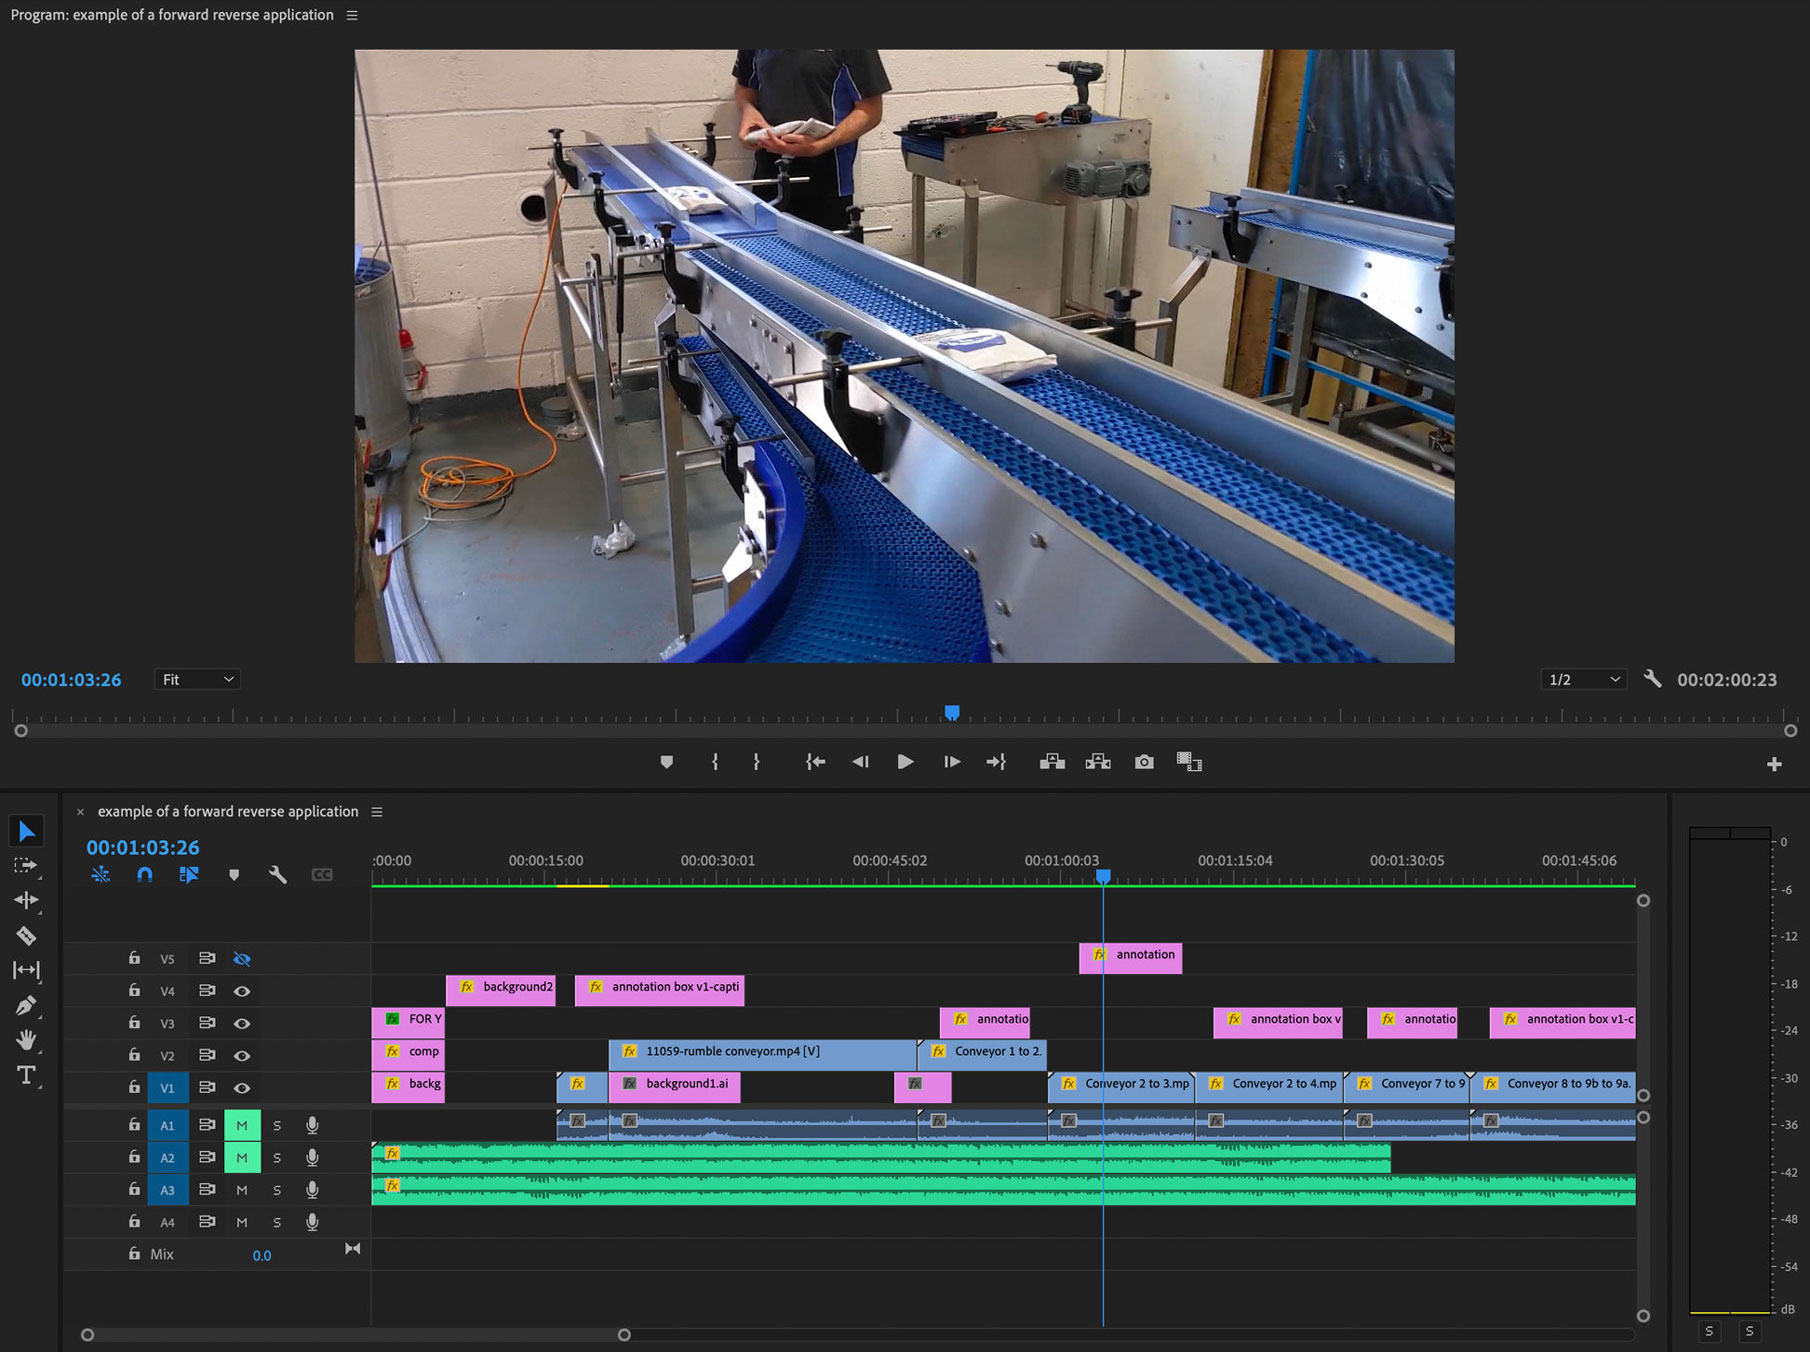 Screenshot of video being edited for Crown Conveyors